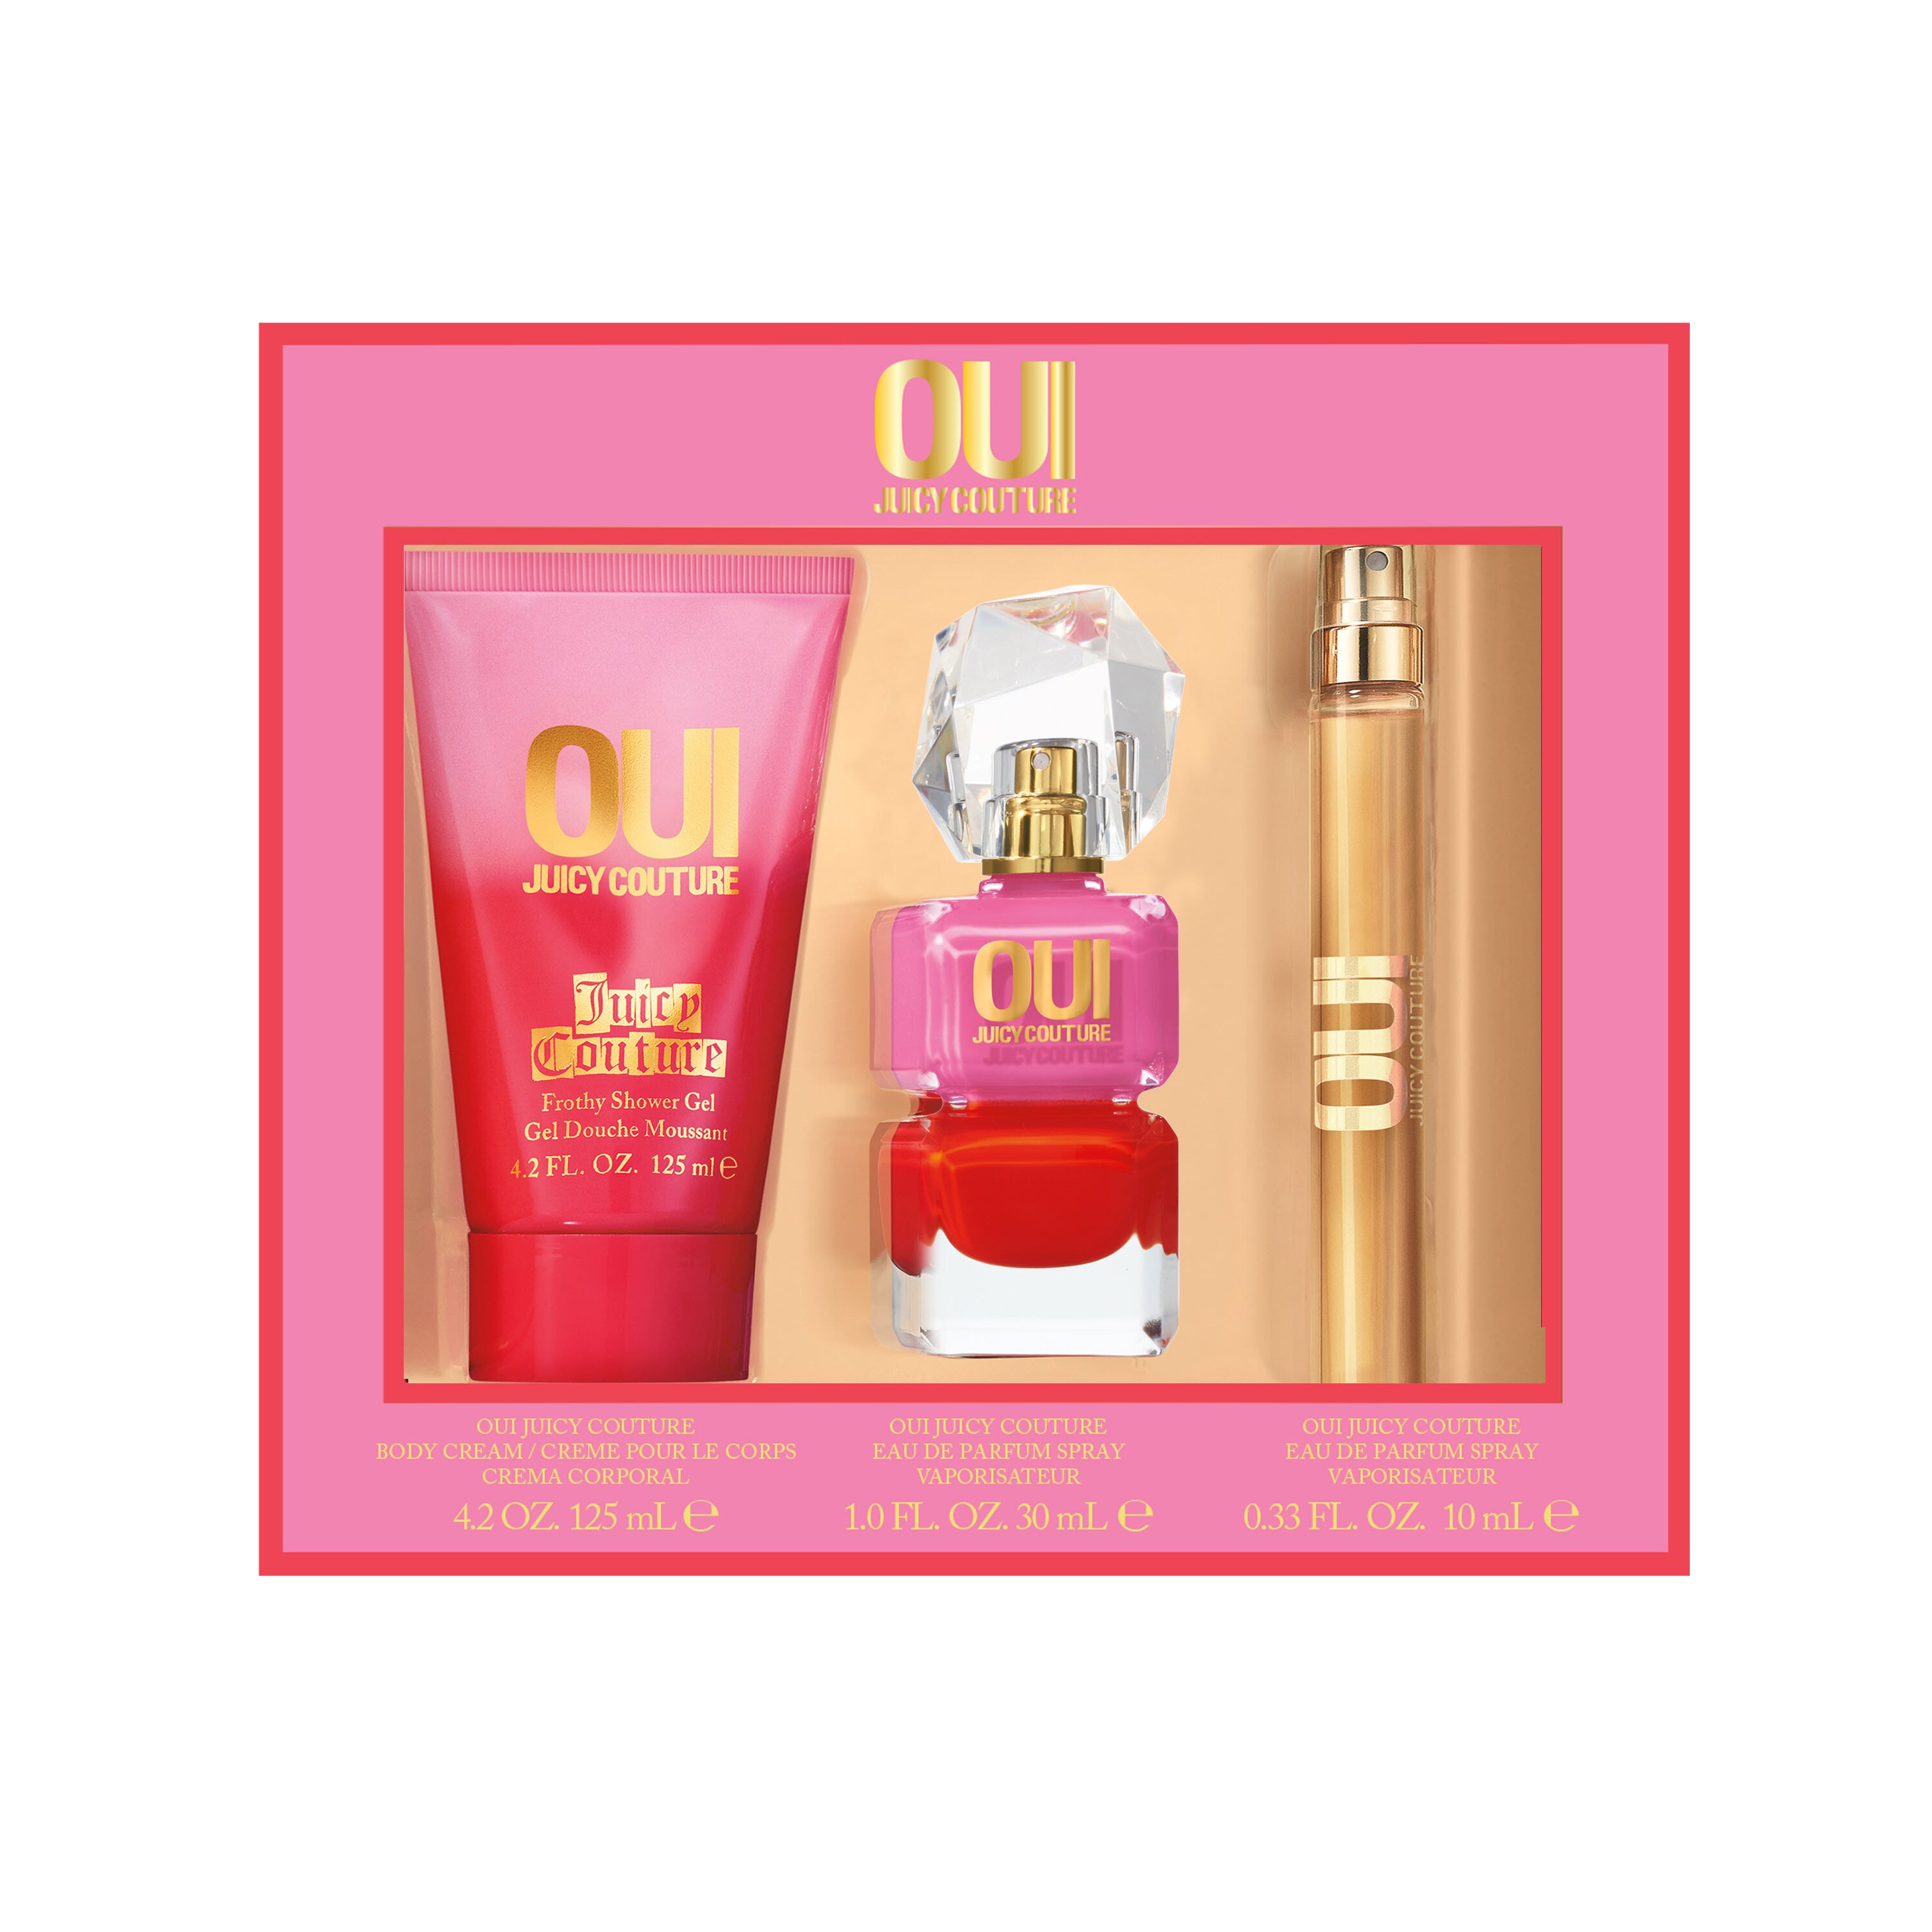 OUI Juicy Couture for Women Fragrance 3 Piece Gift Set